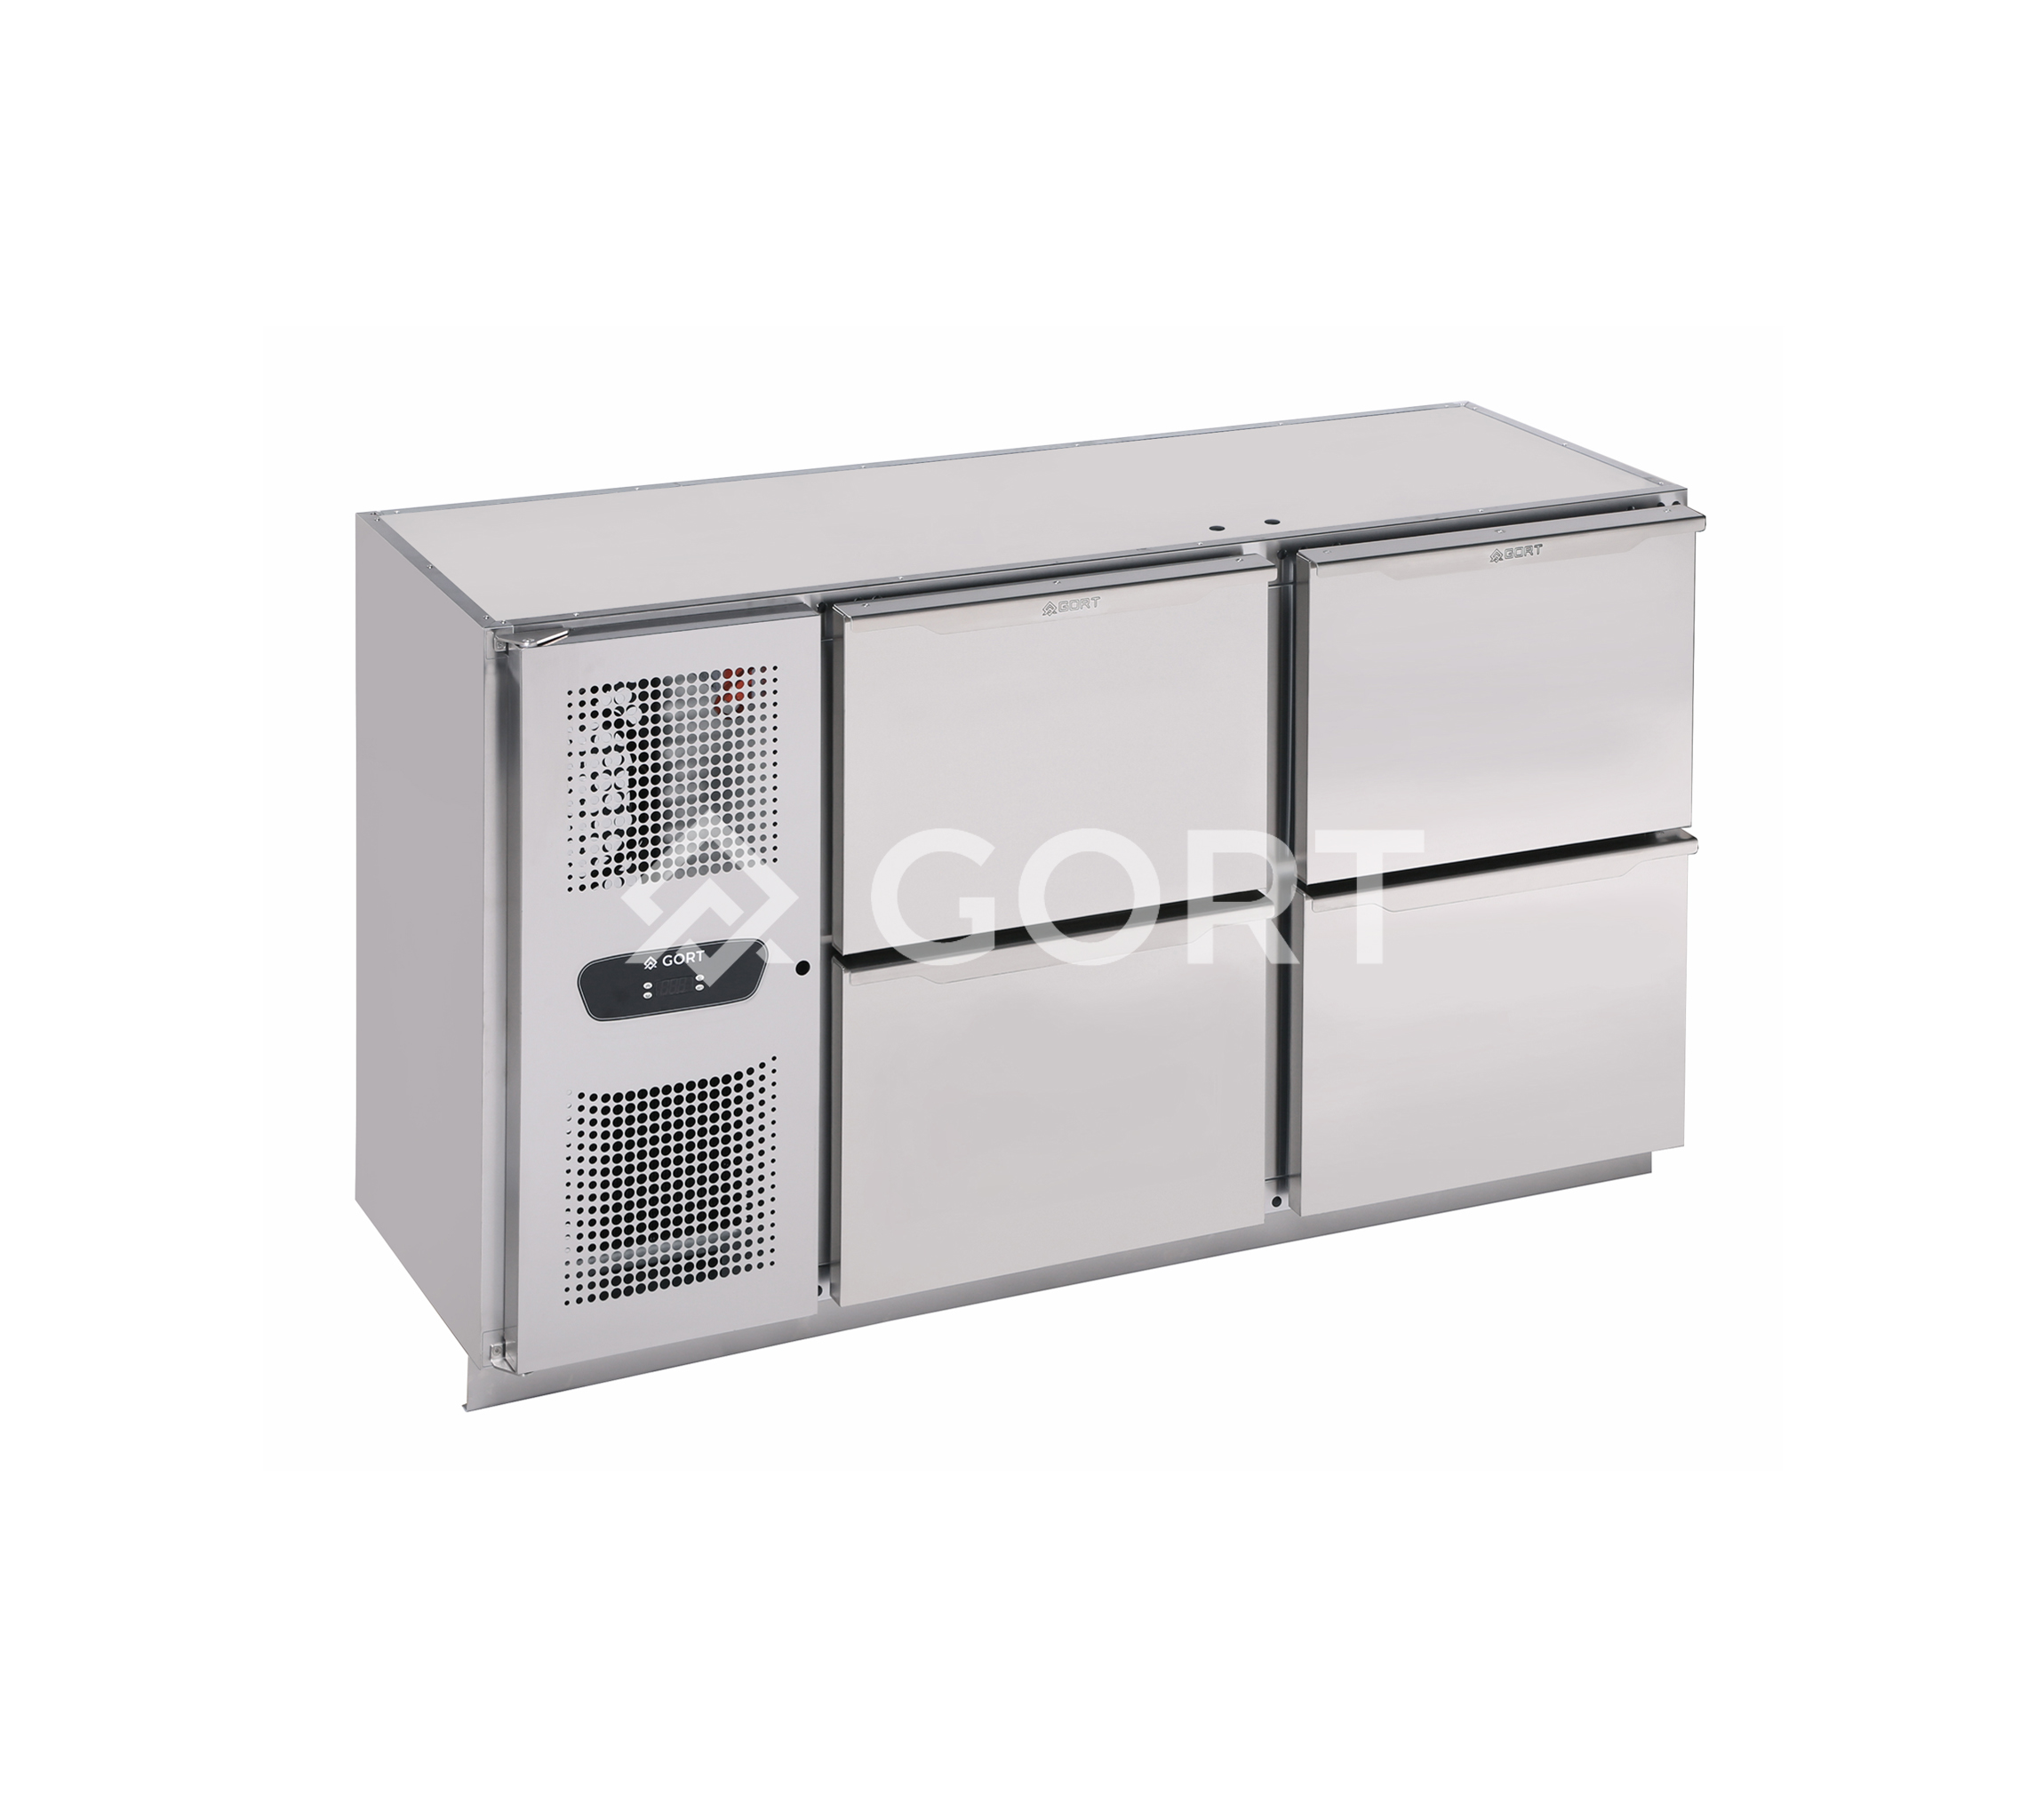 BAR COUNTER REFRIGERATOR with 4 s/s drawers – compressor on the side